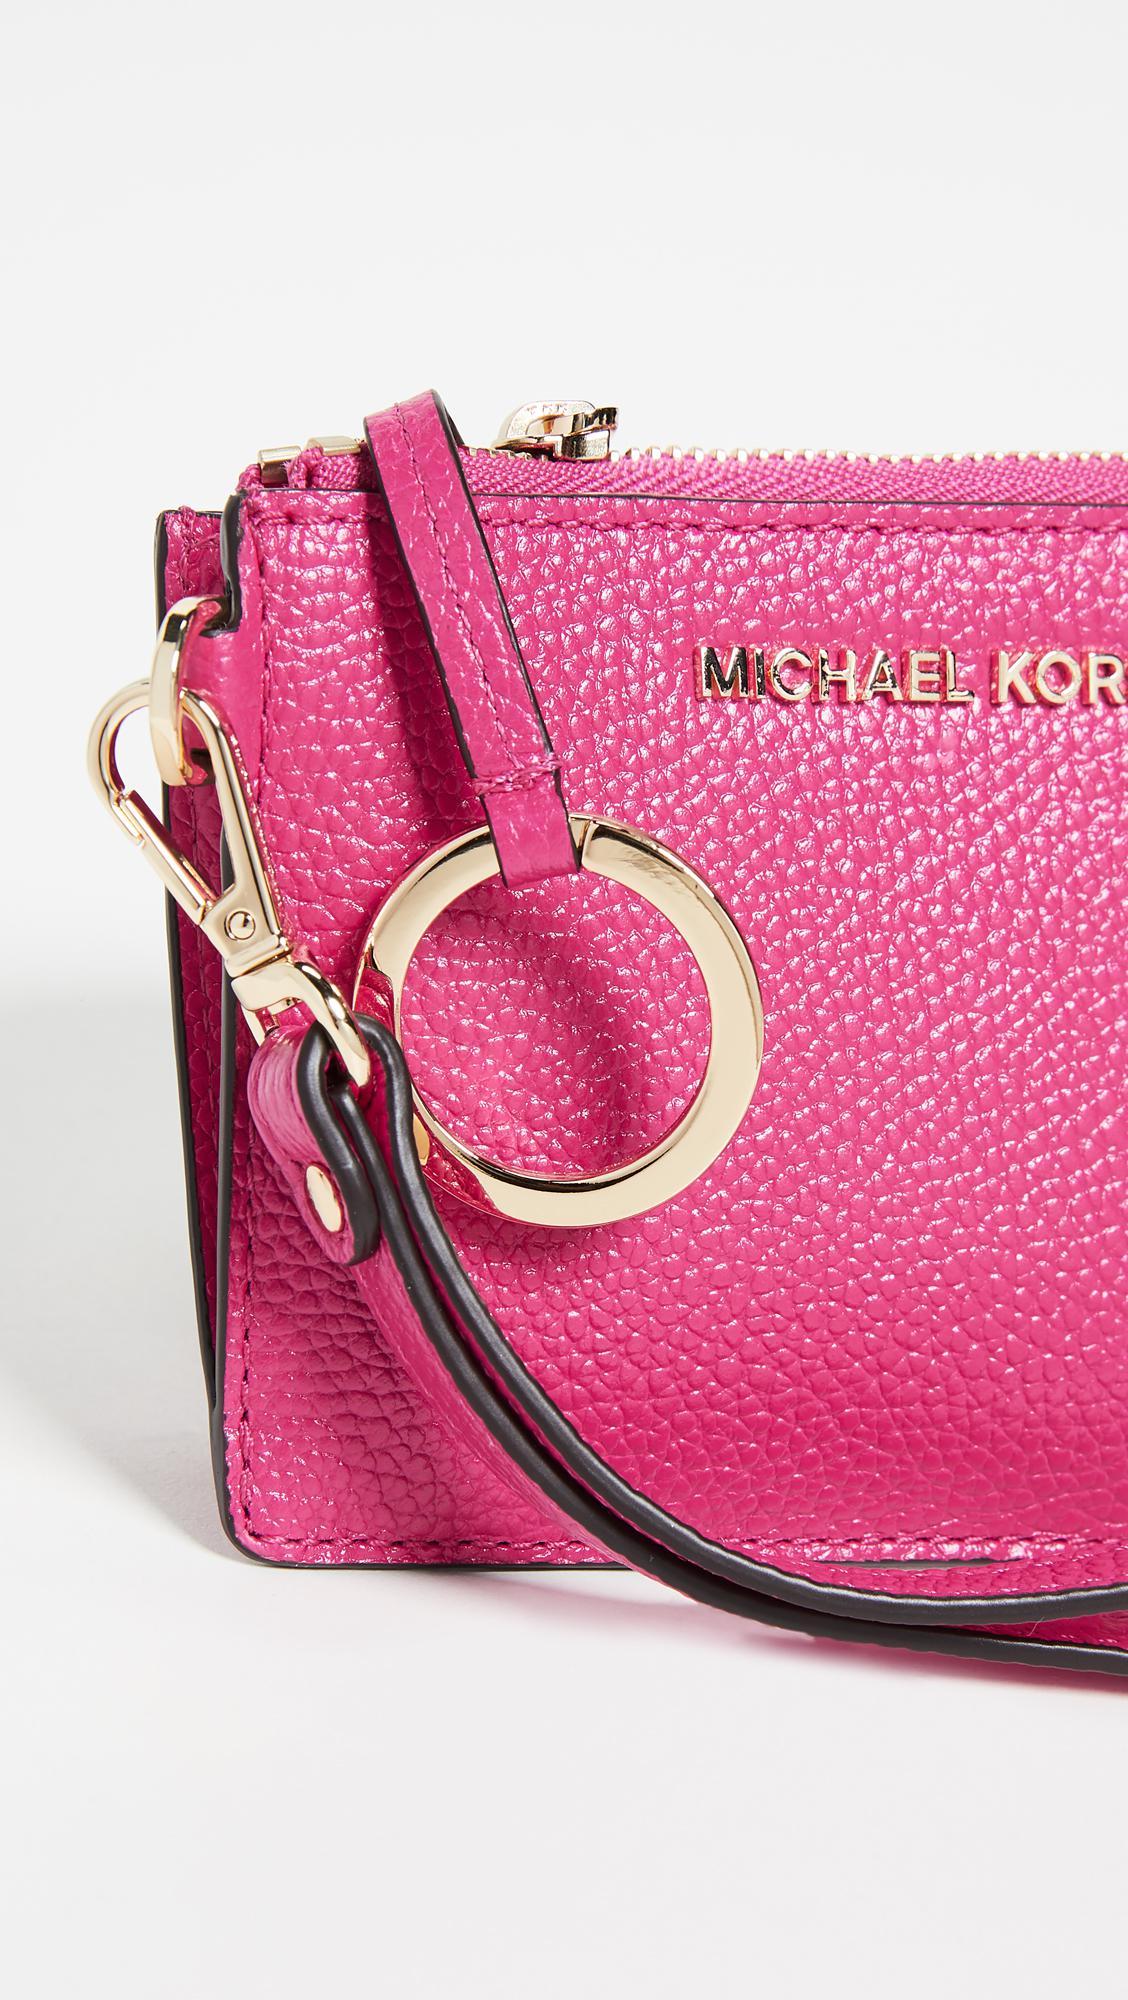 MICHAEL Michael Kors Leather Mercer Small Coin Purse in Ultra Pink (Pink) - Lyst